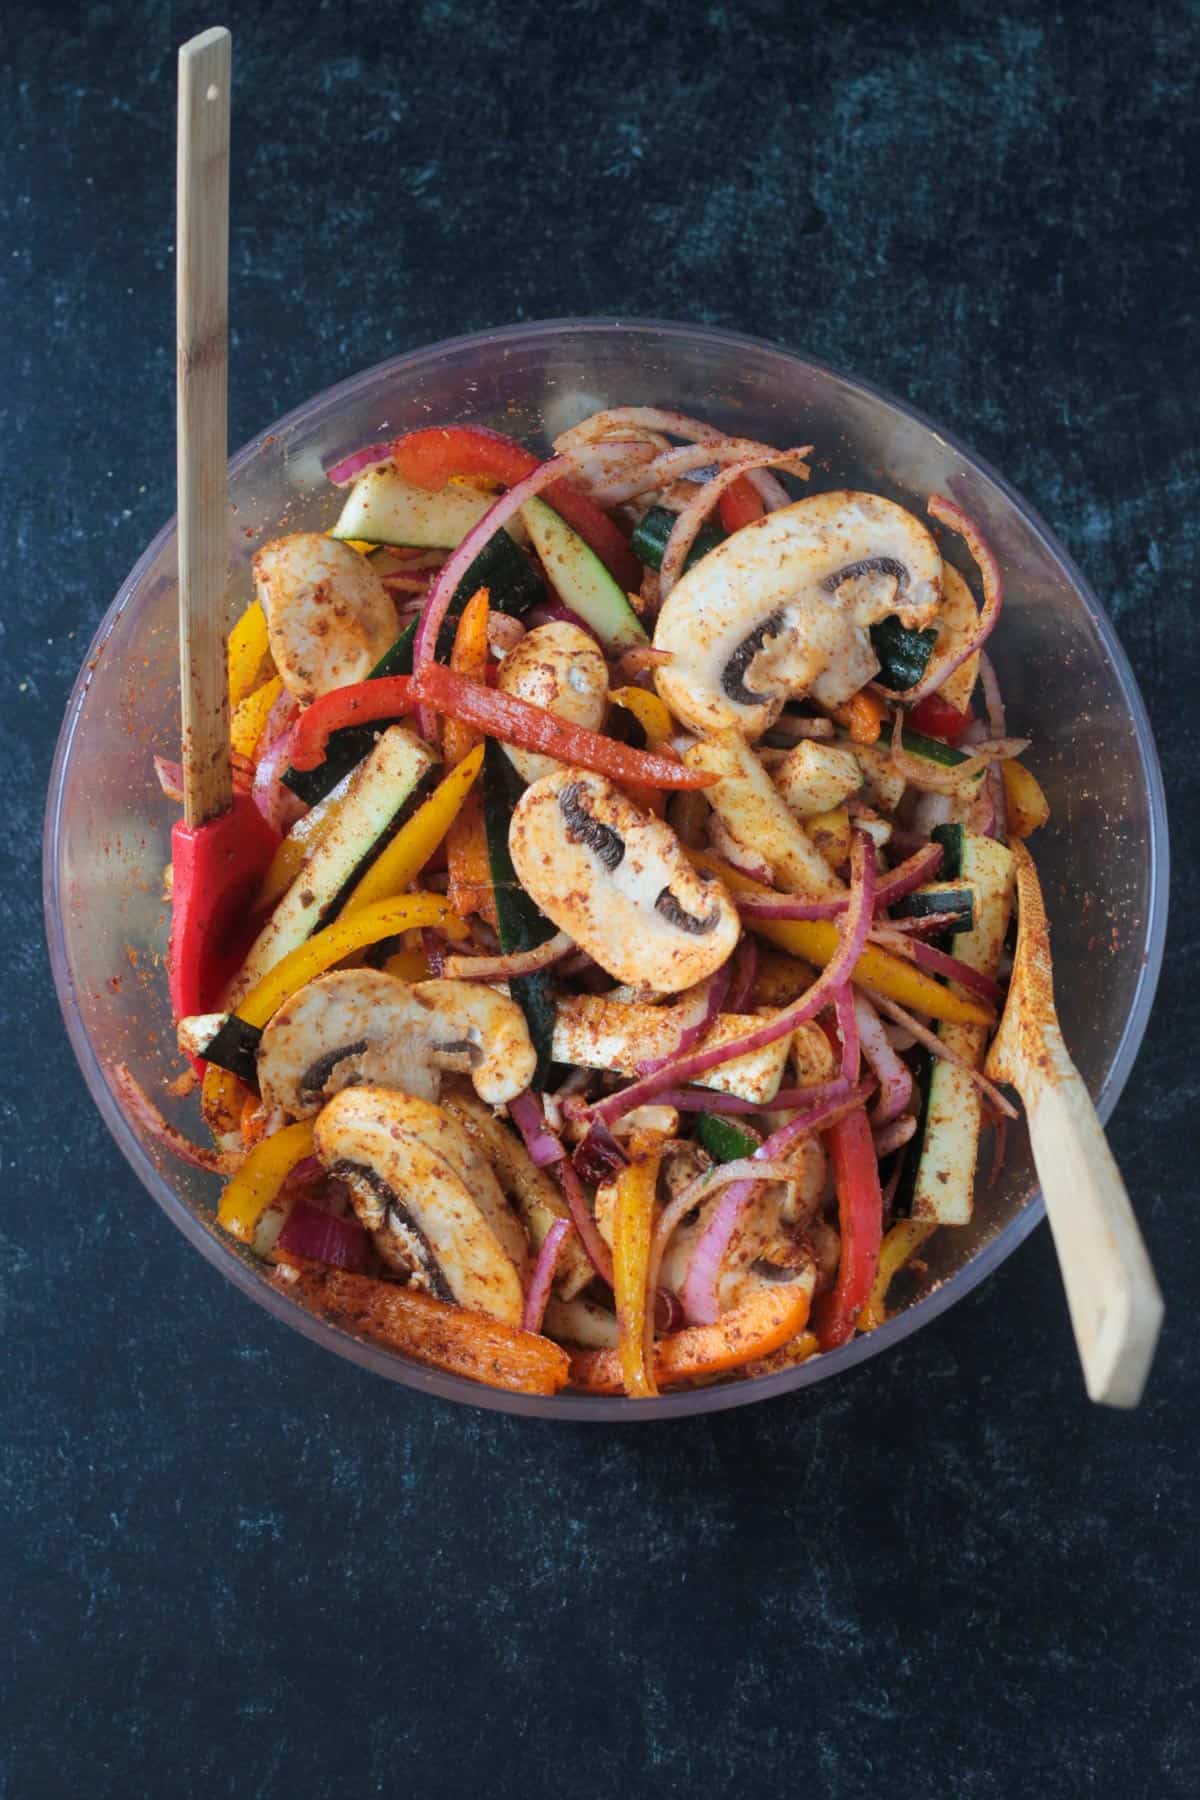 Sliced mushrooms, zucchini, peppers and onions in a bowl mixed with spices.